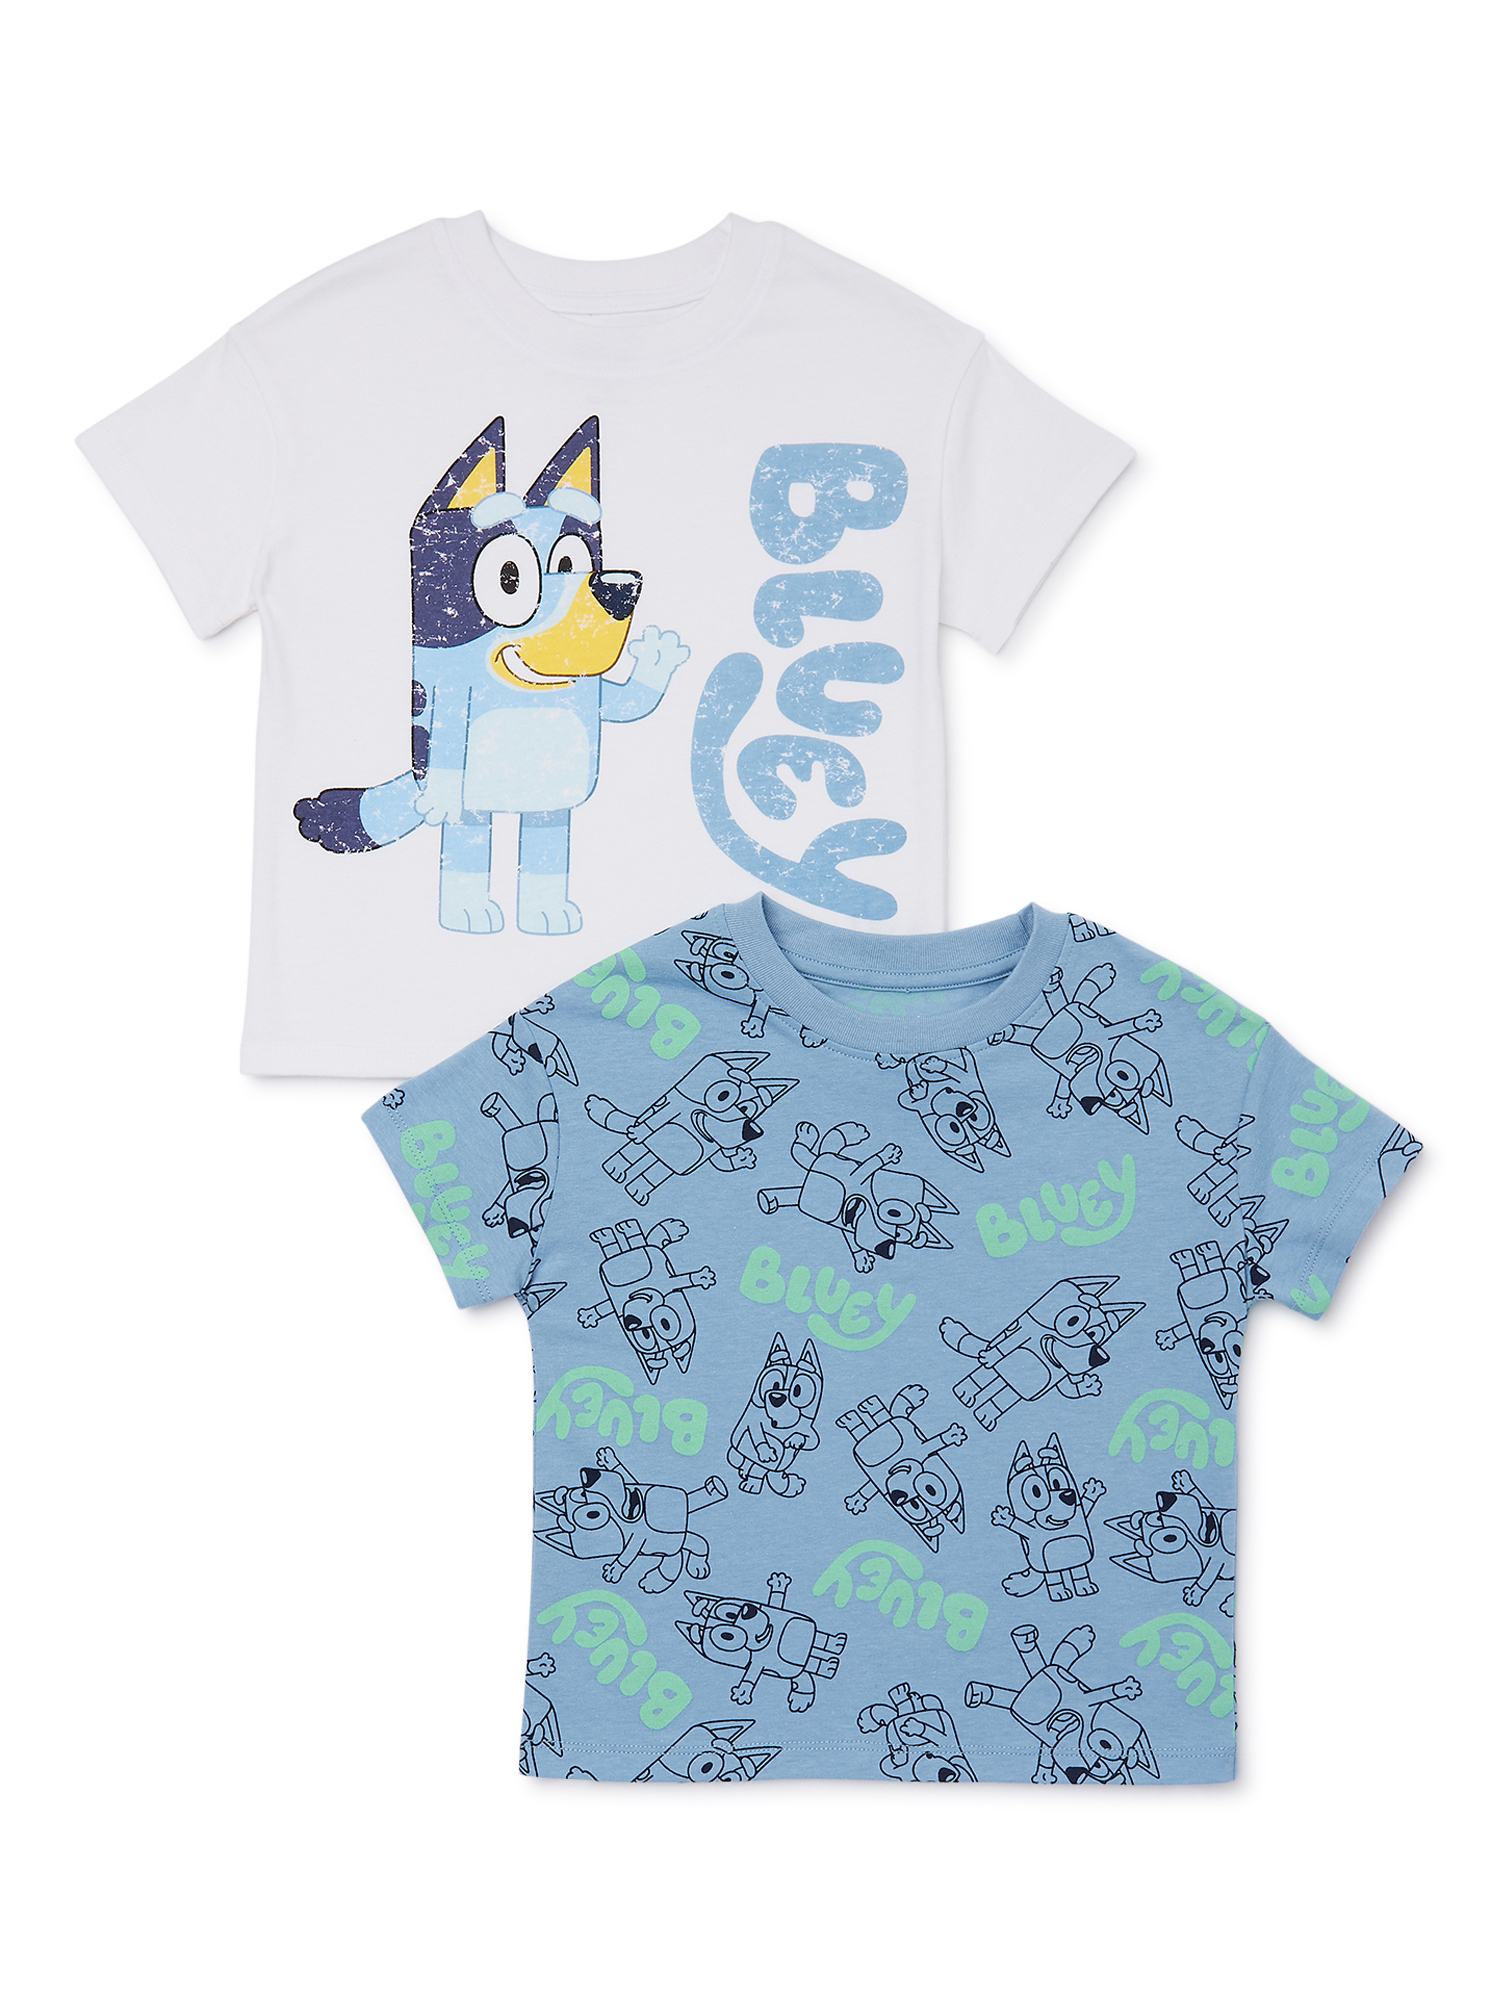 Bluey Toddler Boy Graphic Tees, 2-Pack, Sizes 2T-5T - image 1 of 7